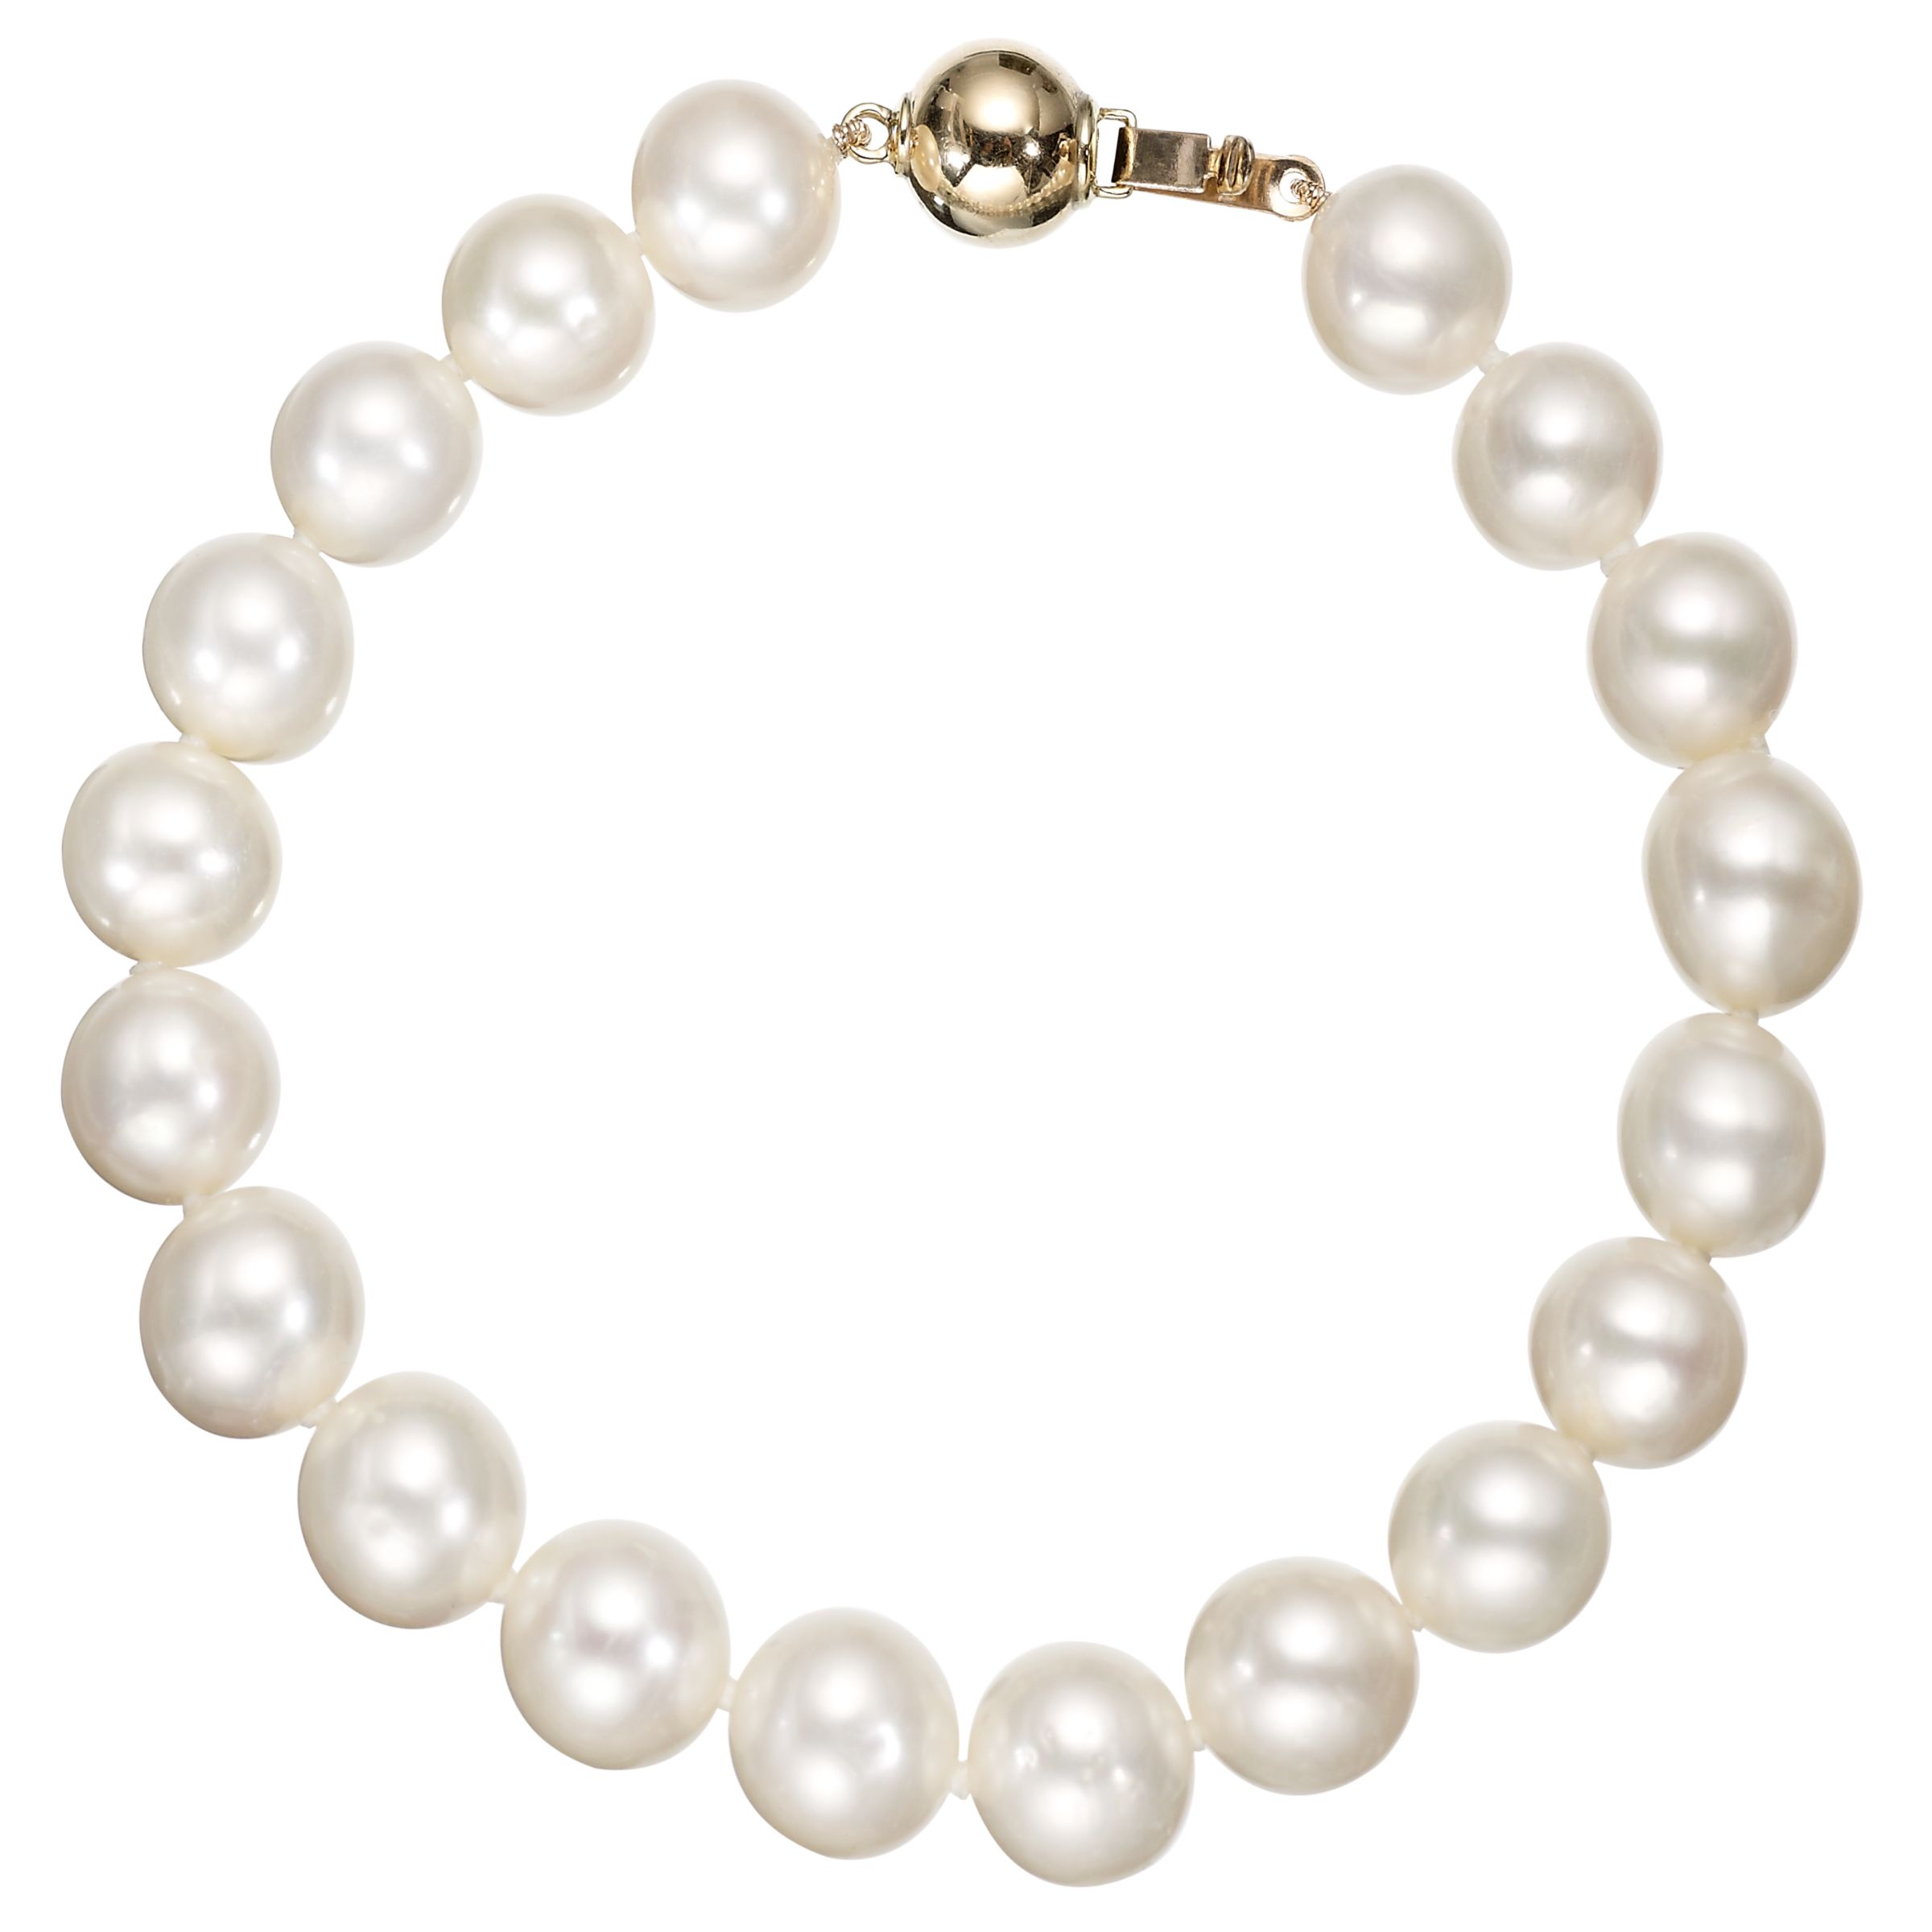 Freshwater Lustre Pearl Knotted 7.5" Bracelet with Gold Clasp at John Lewis